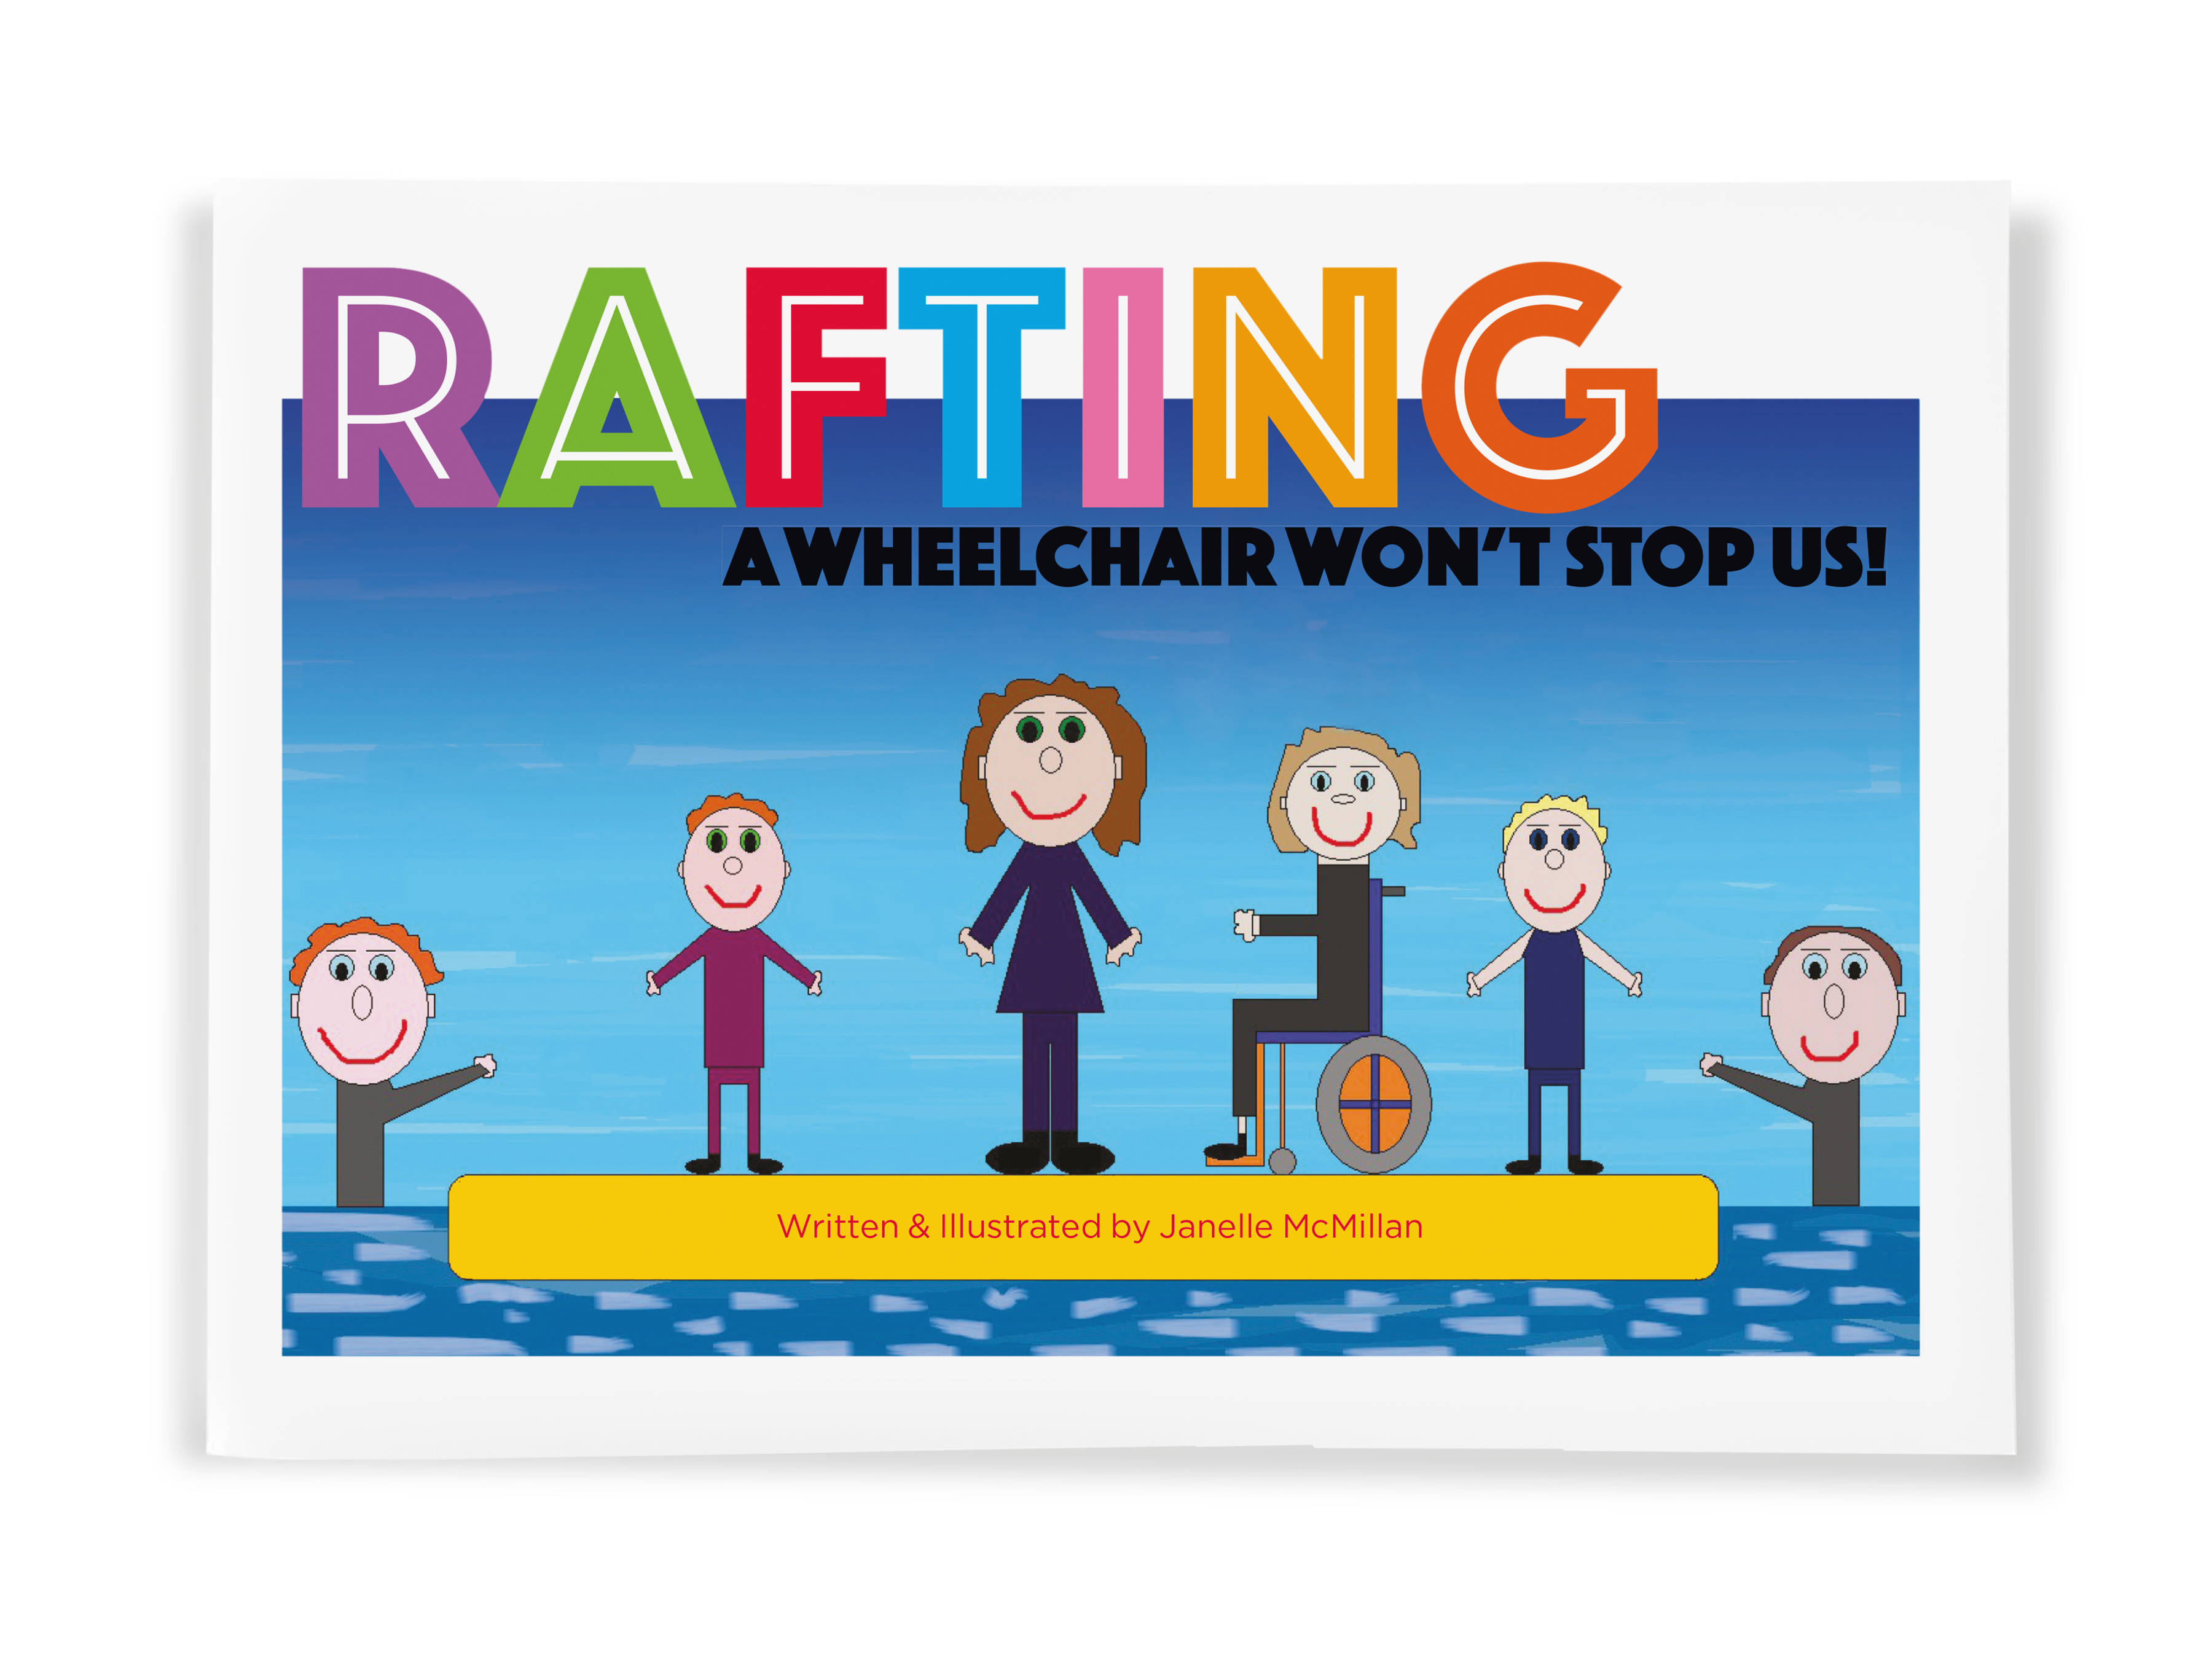 The book cover of ‘RAFTING – A Wheelchair Won’t Stop Us!’ by Janelle McMillian showing a drawing of the main character Trent in his wheelchair and his five friends on a rafting adventure.